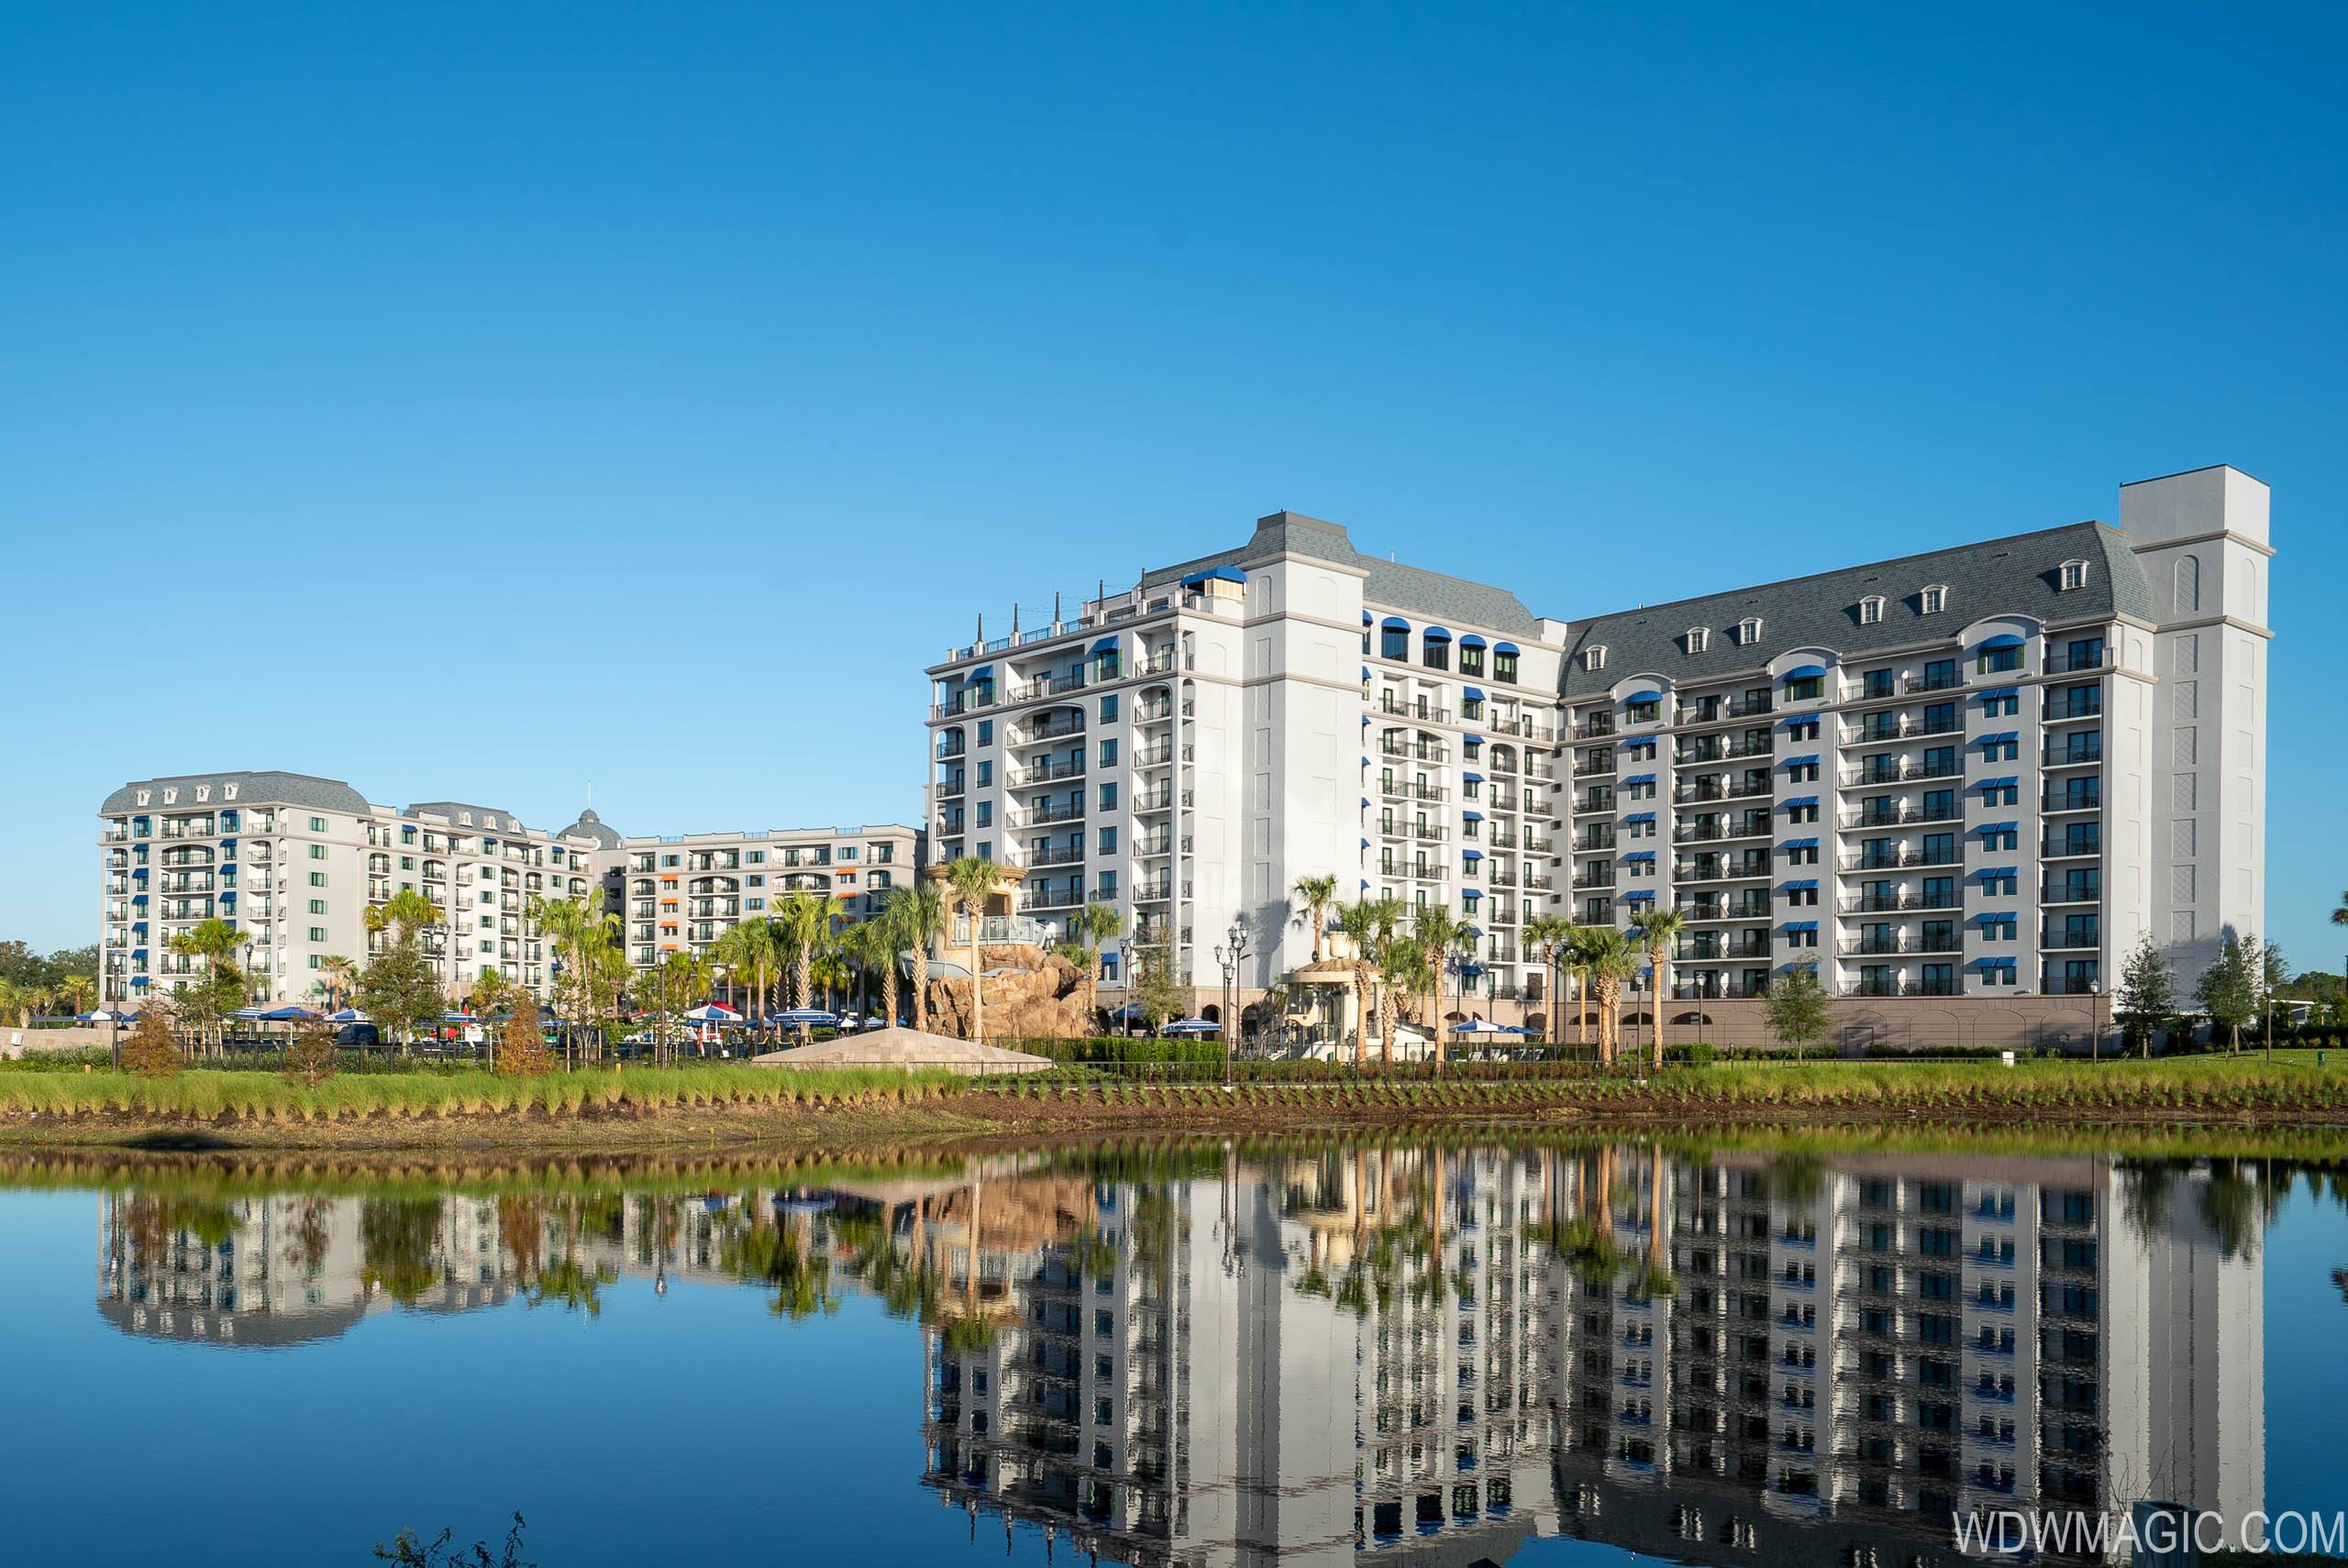 Savings of 20% are available at Disney's Riviera Resort